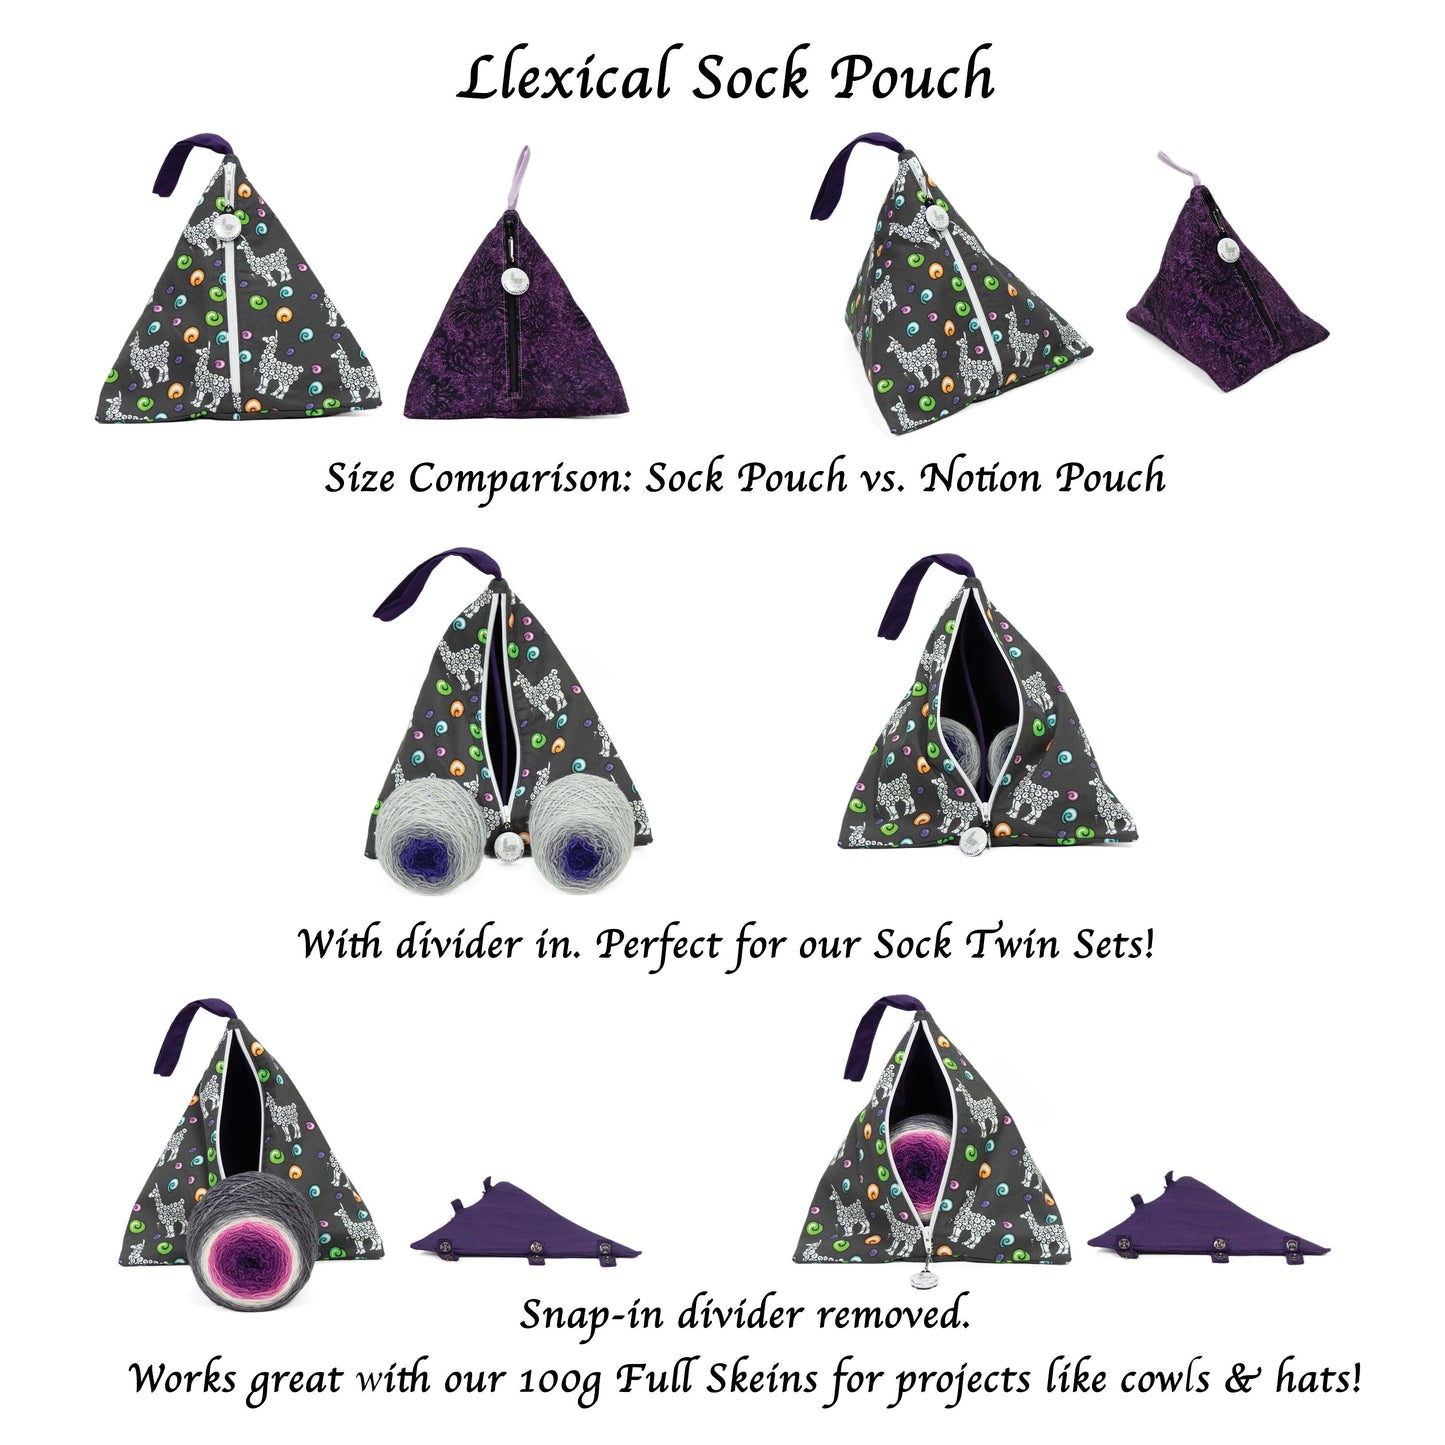 Polar Night - Llexical Divided Sock Pouch - Knitting, Crochet, Spinning Project Bag